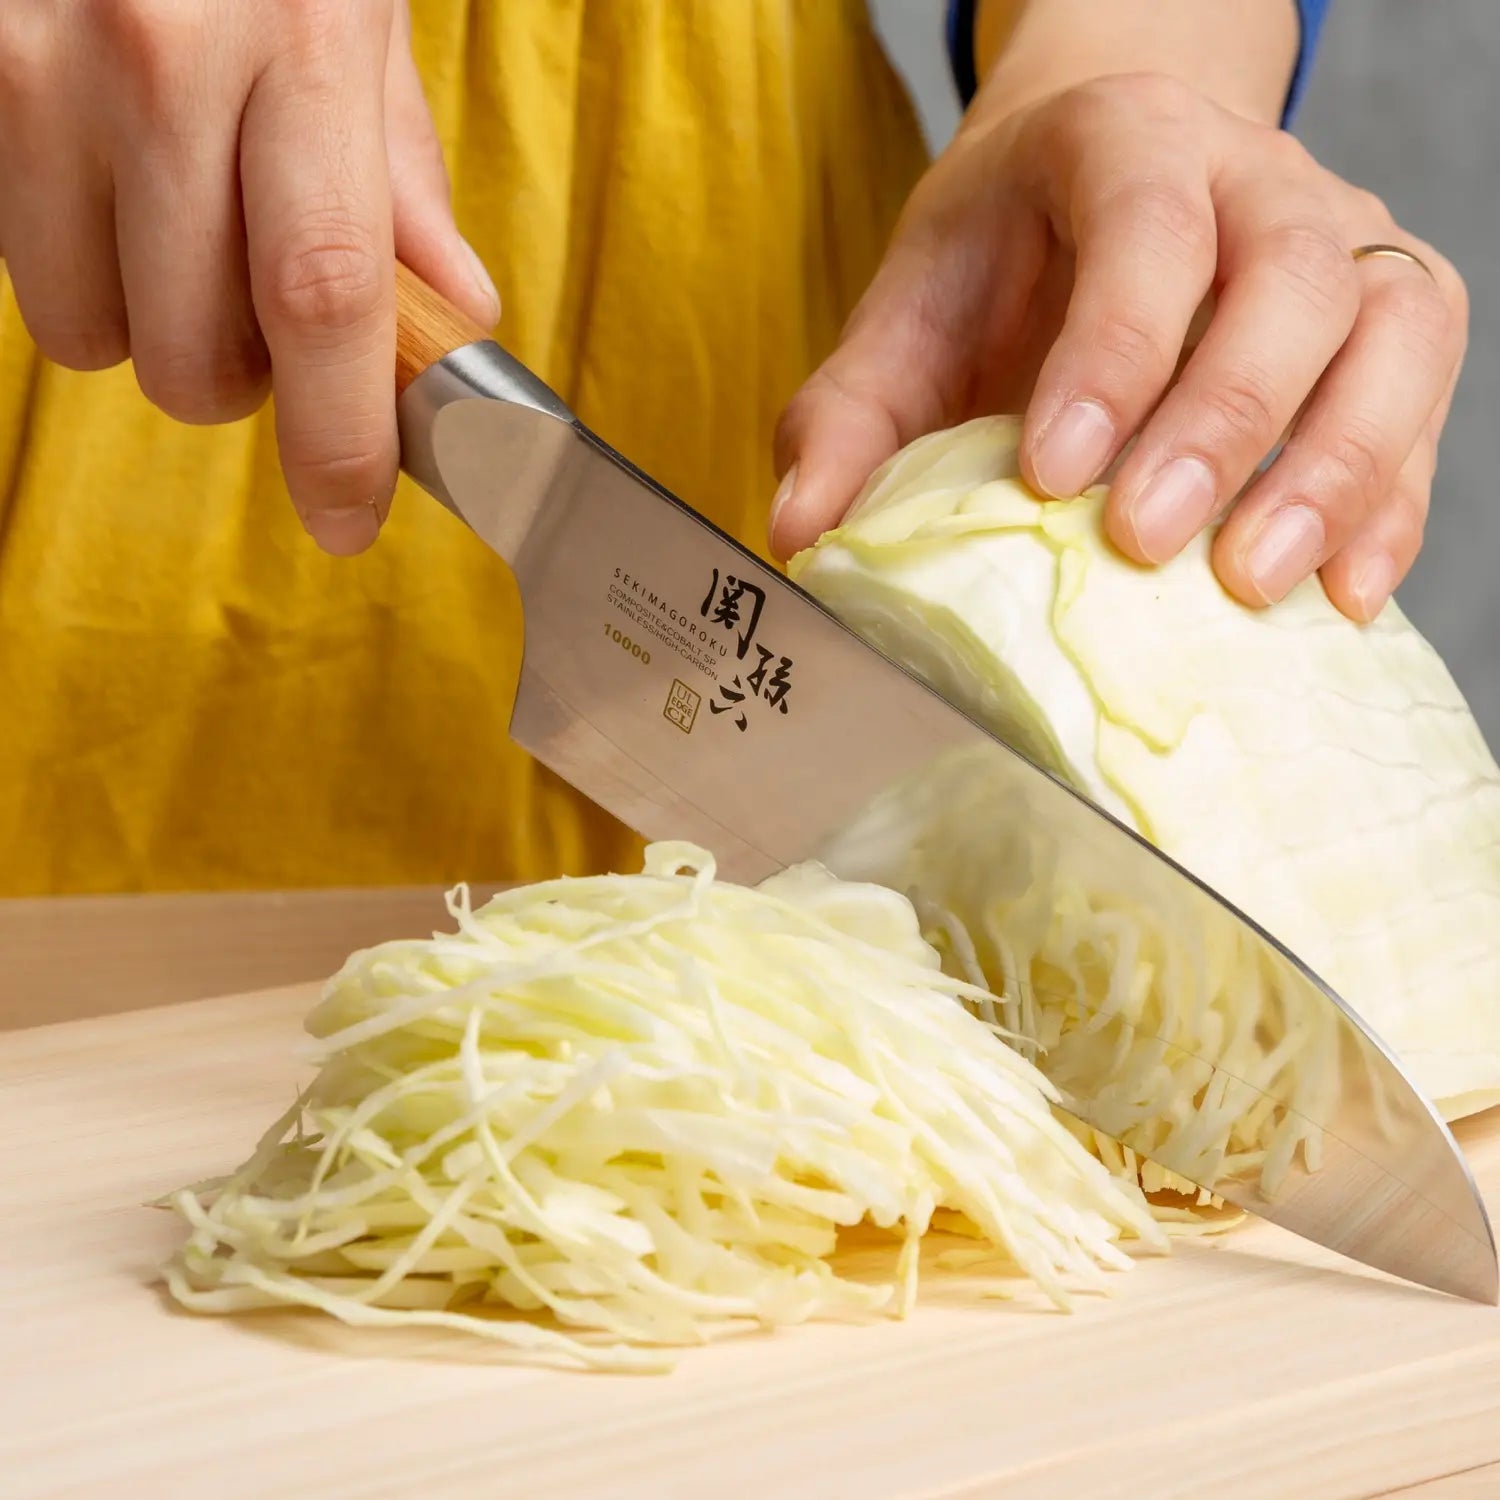 The Best of Japan's Quirky Kitchen Gadgets!